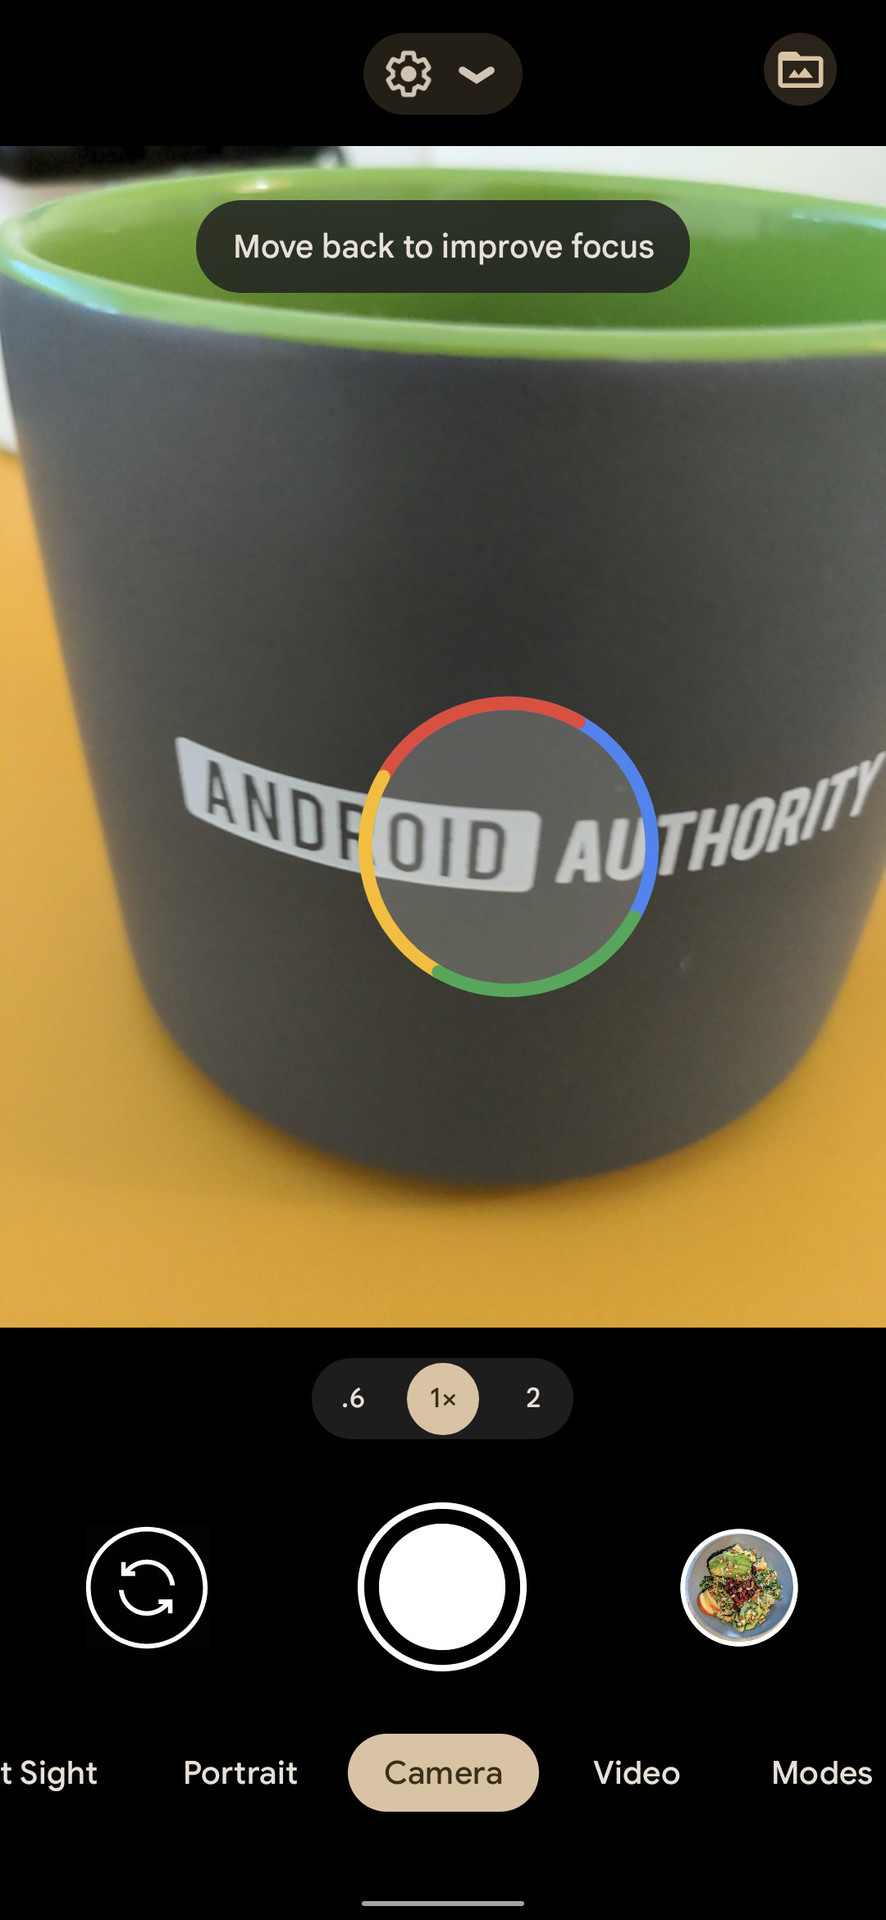 Google Camera viewfinder with Lens recognition animation